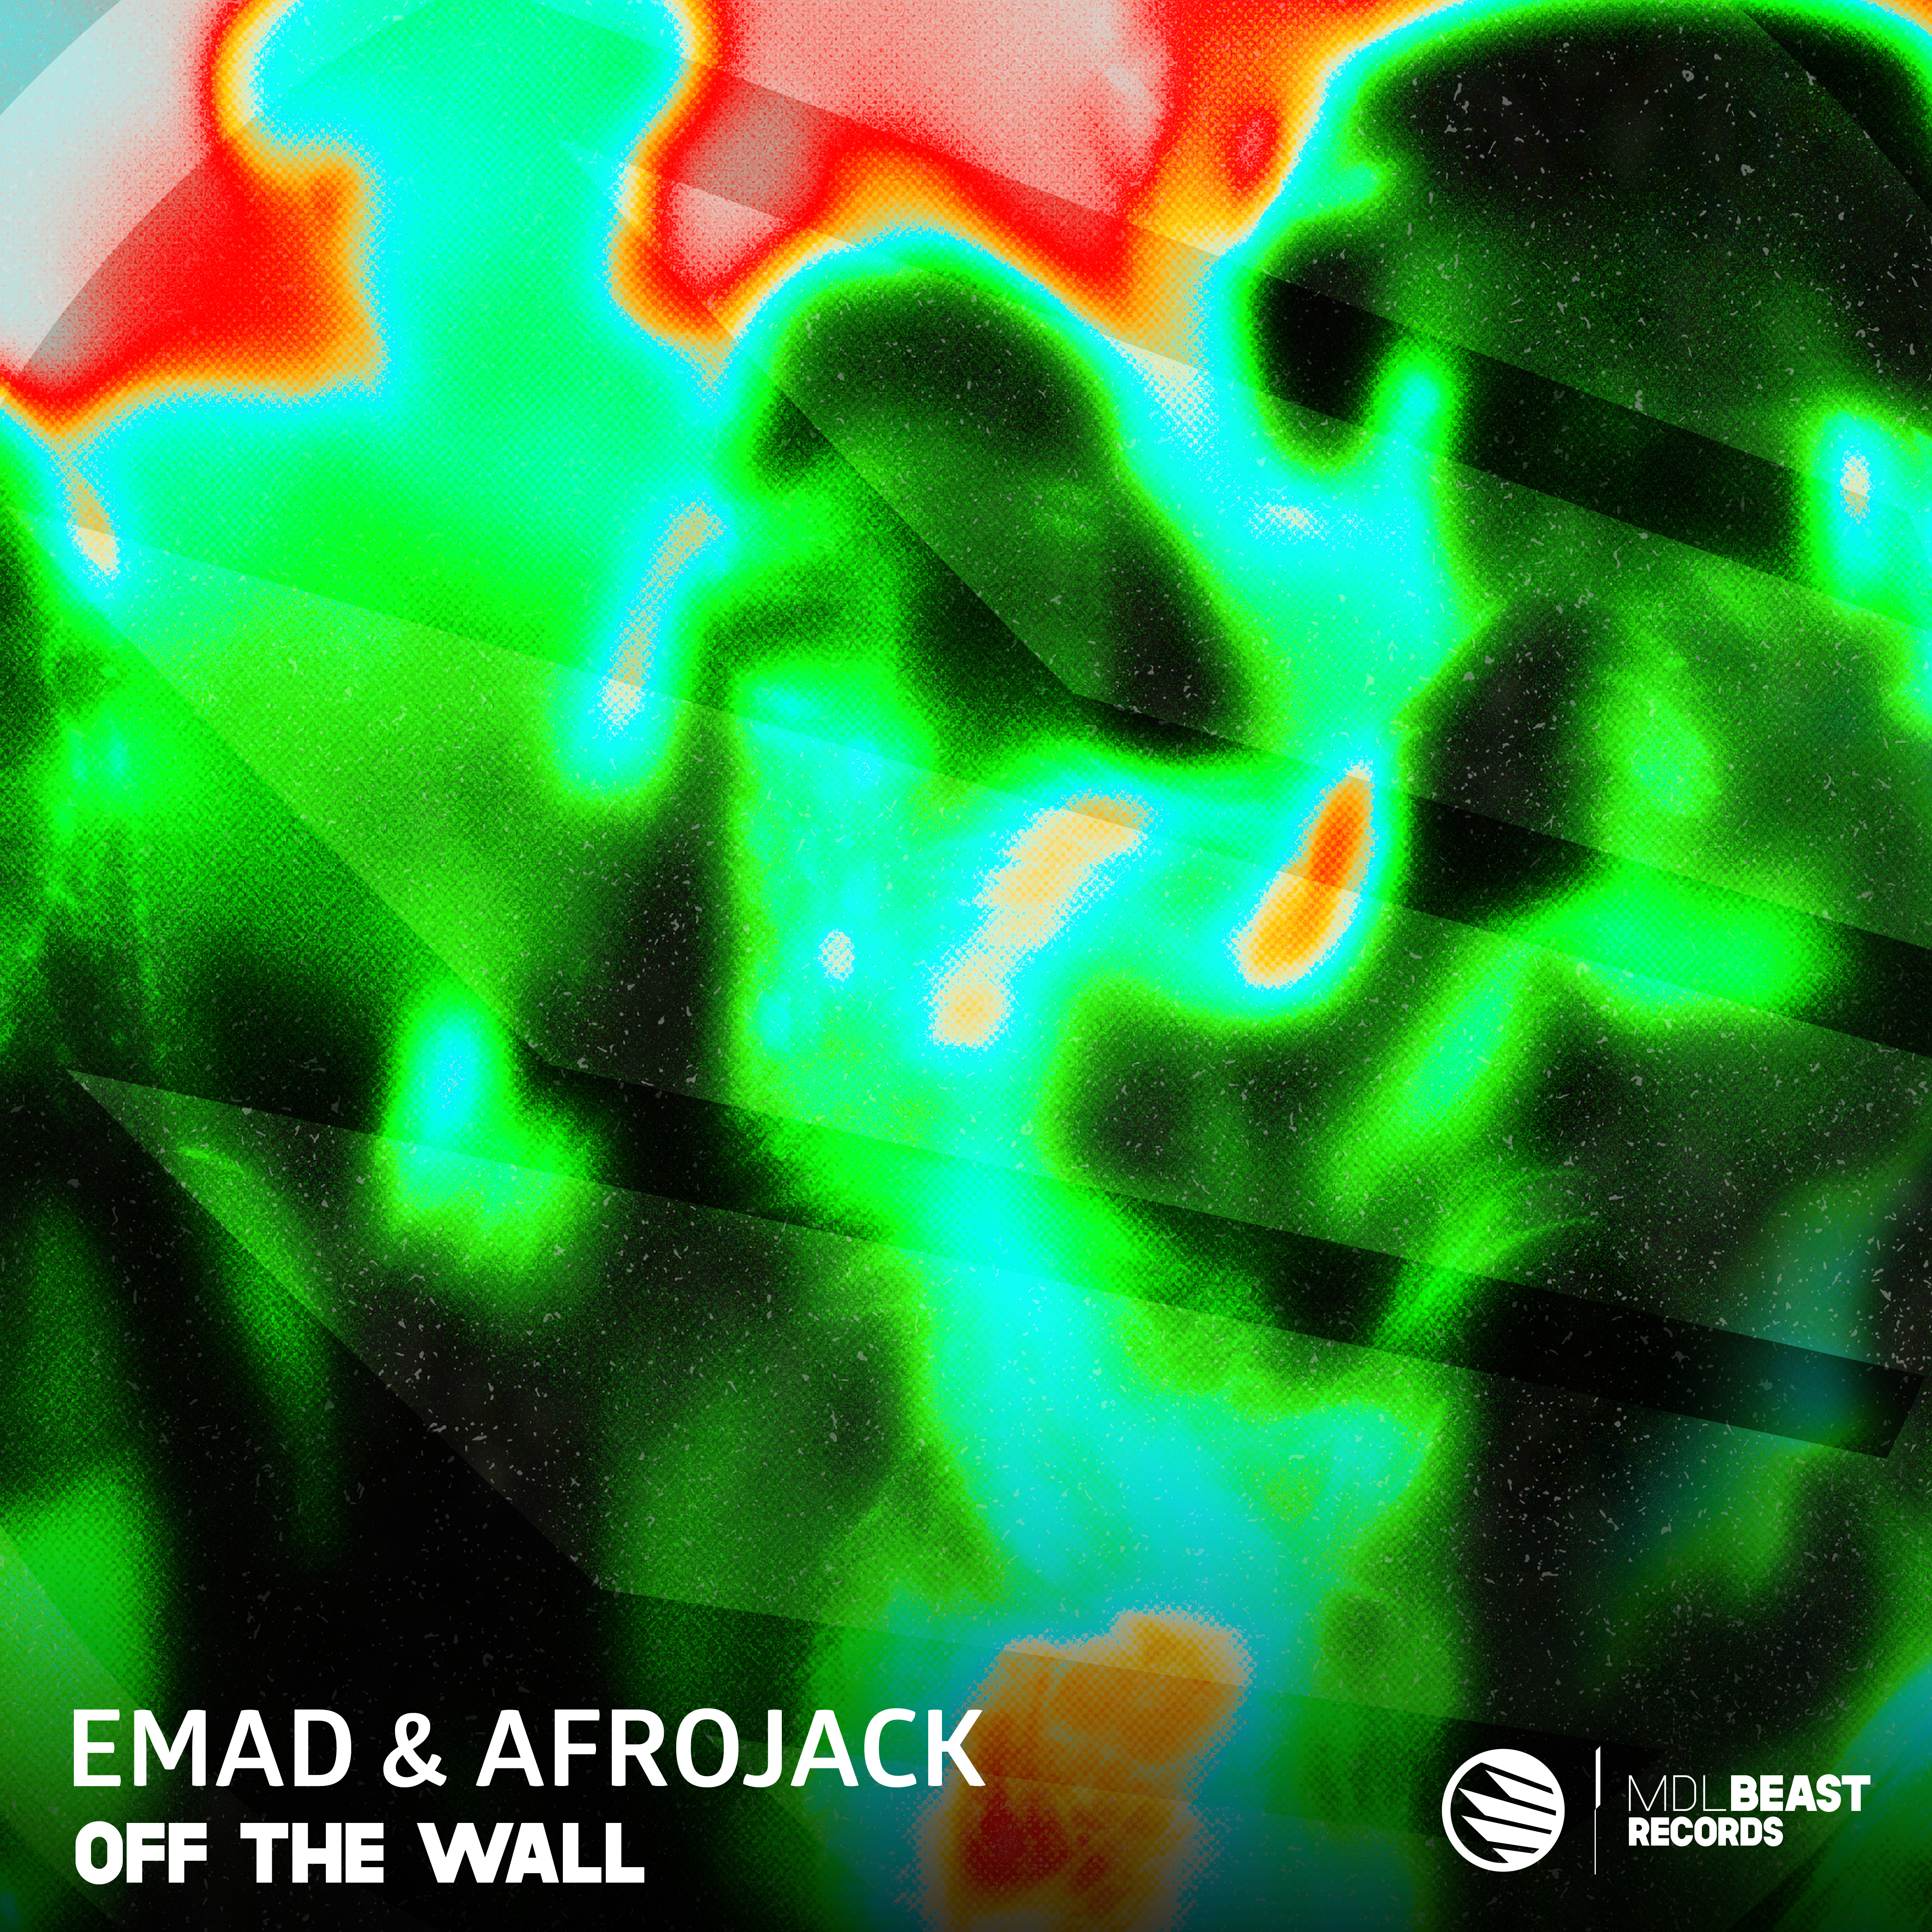  EMAD Y AFROJACK  EN ” OFF THE WALL”